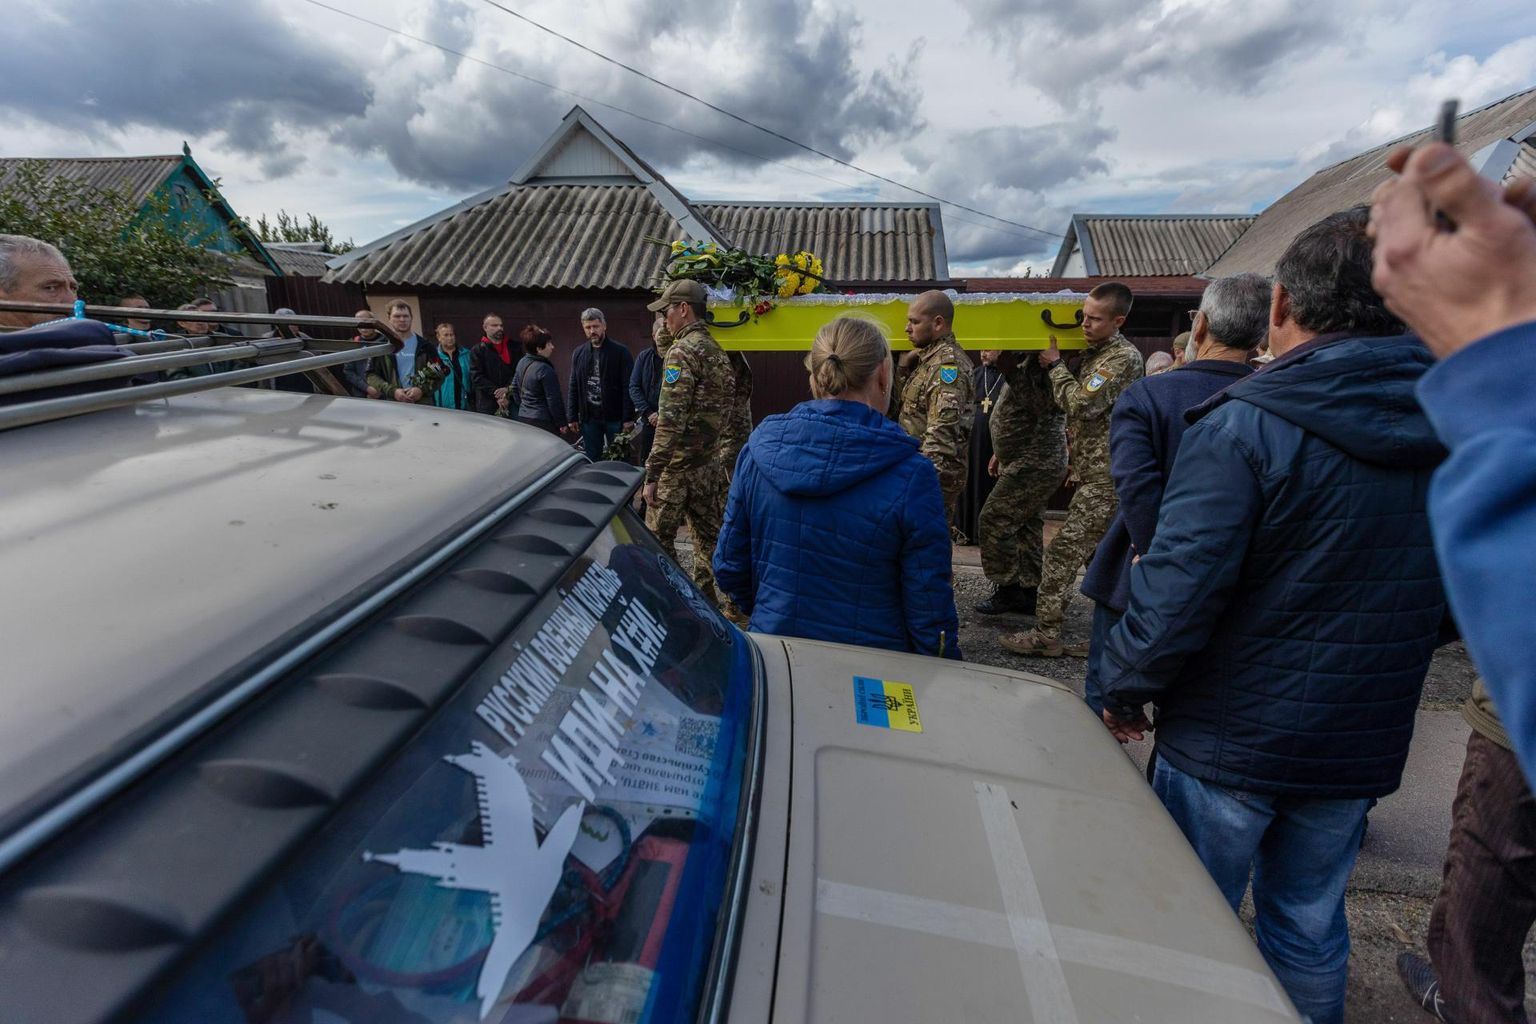 Ukrainian soldiers took the fallen comrade Vladimir Linsky from his home on Saturday on his last journey. On the passenger car standing in front of the house is a letter that sends the Russian warship to a place known to everyone.